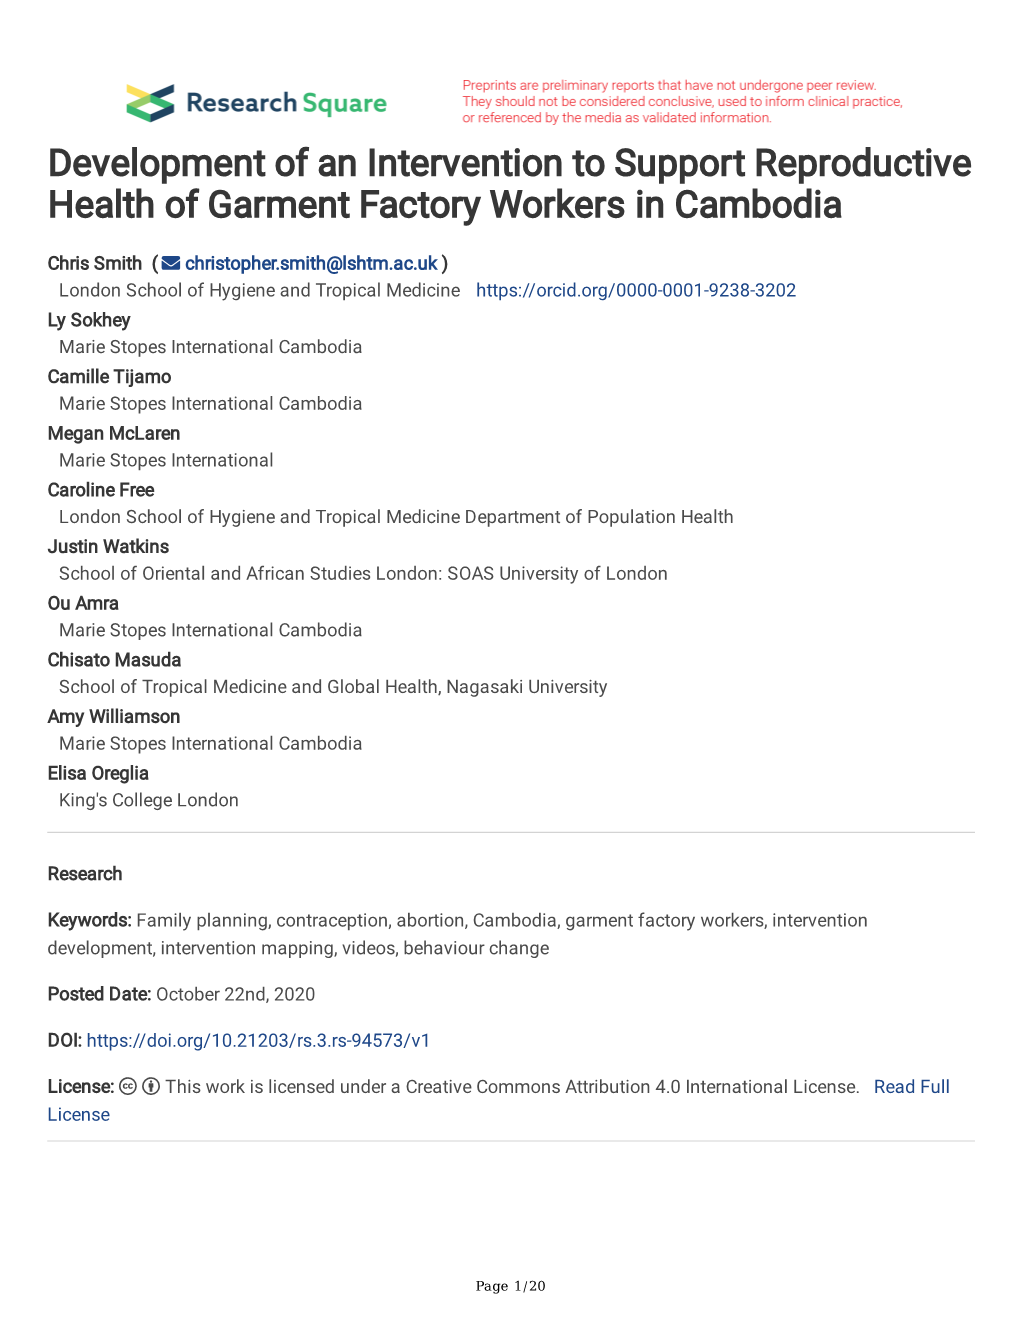 Development of an Intervention to Support Reproductive Health of Garment Factory Workers in Cambodia